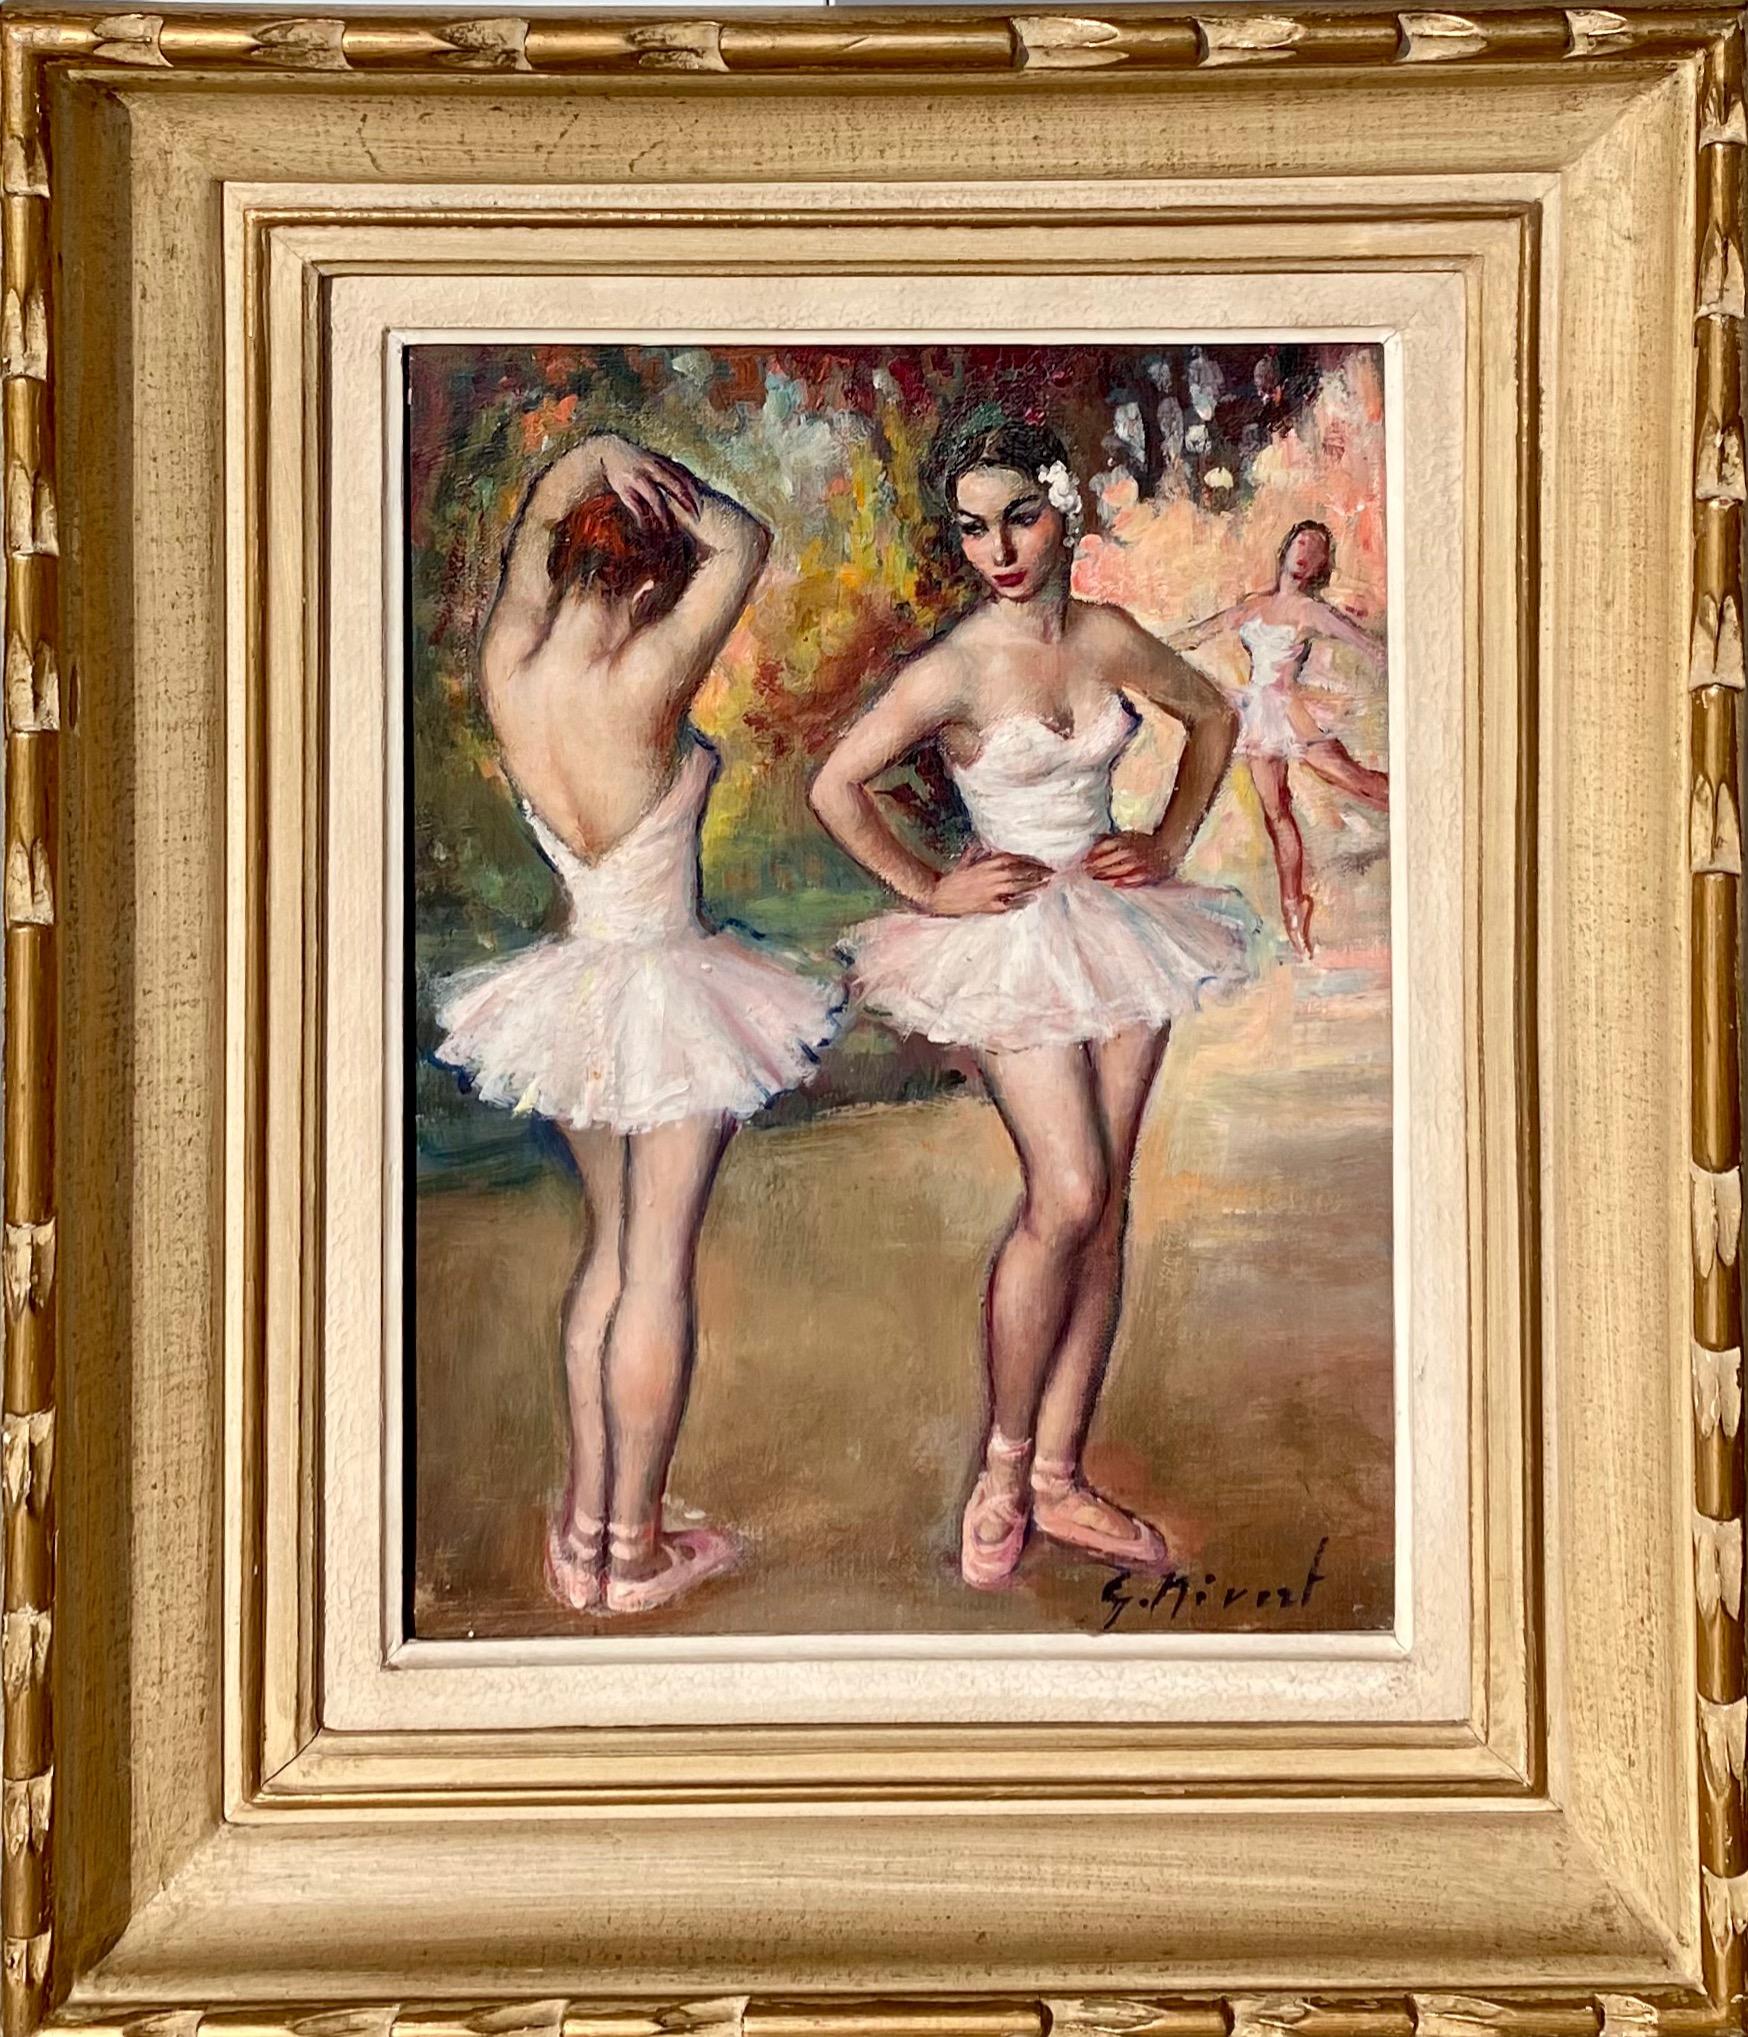 Georgette Nivert Figurative Painting - 19th century French painting Les Ballerines - Female artist Degas Dancers Dance